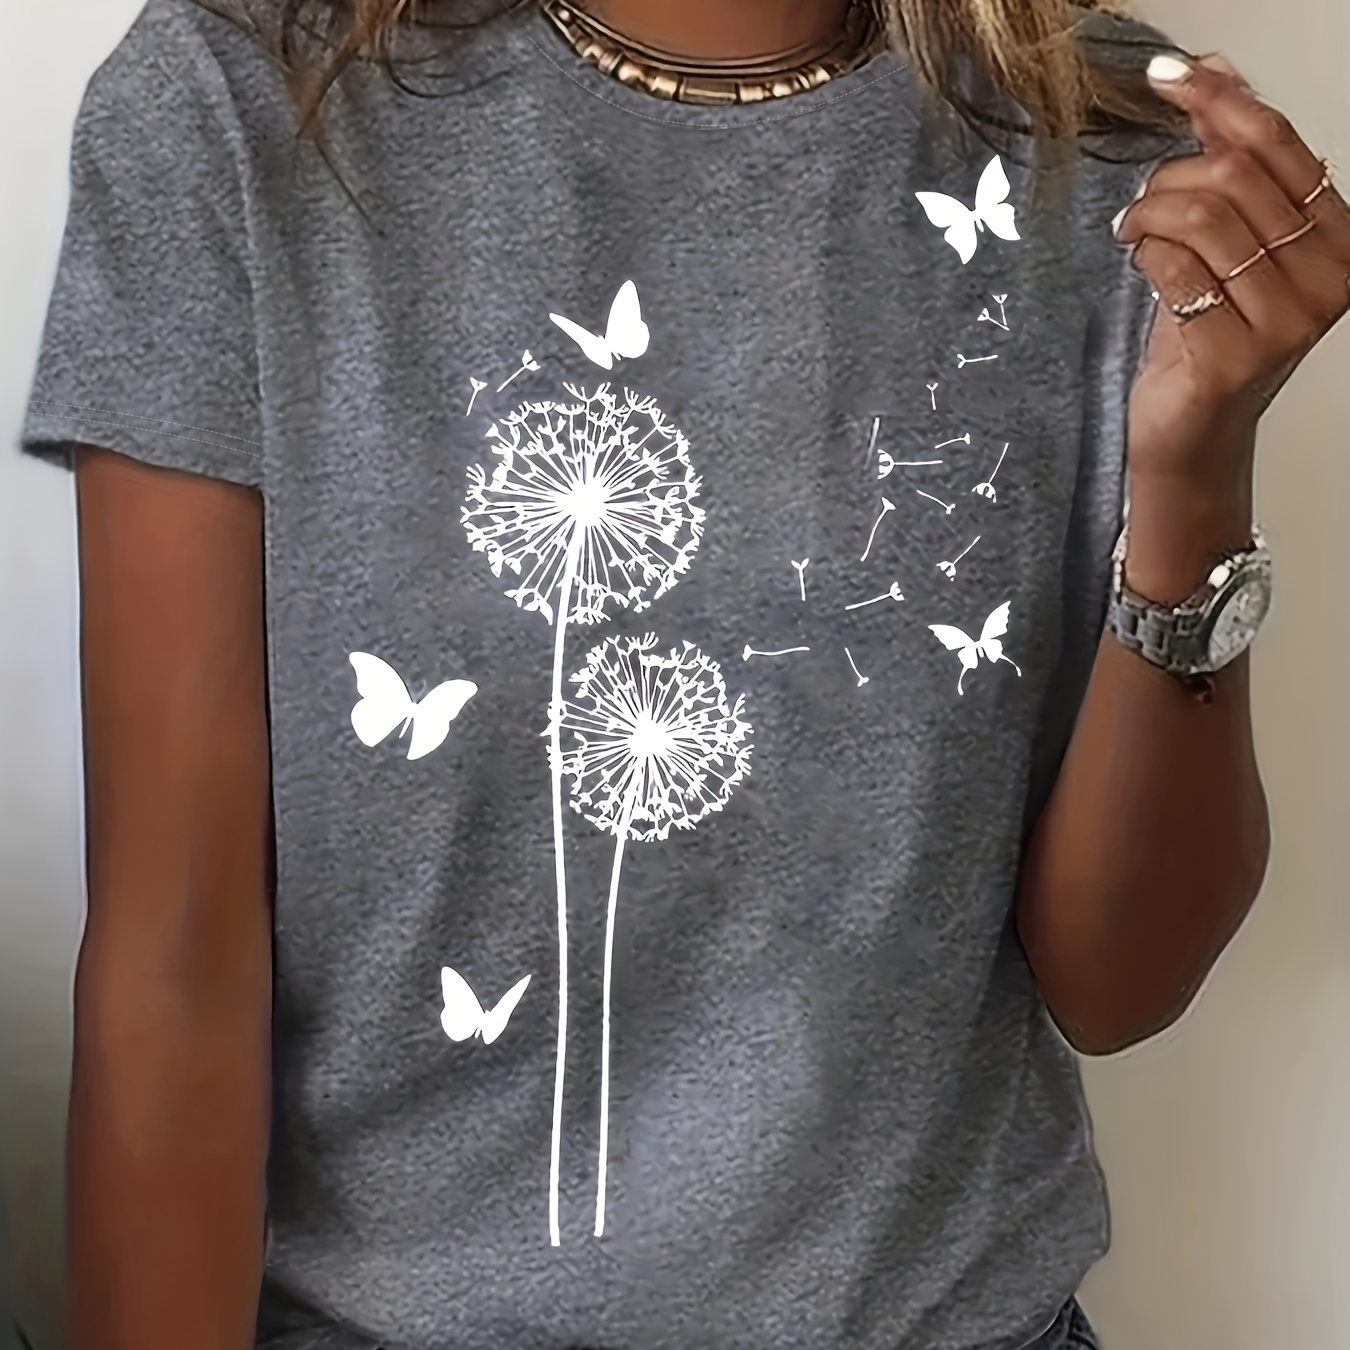 

Dandelions & Butterfly Print T-shirt, Casual Crew Neck Short Sleeve T-shirt For Spring & Summer, Women's Clothing